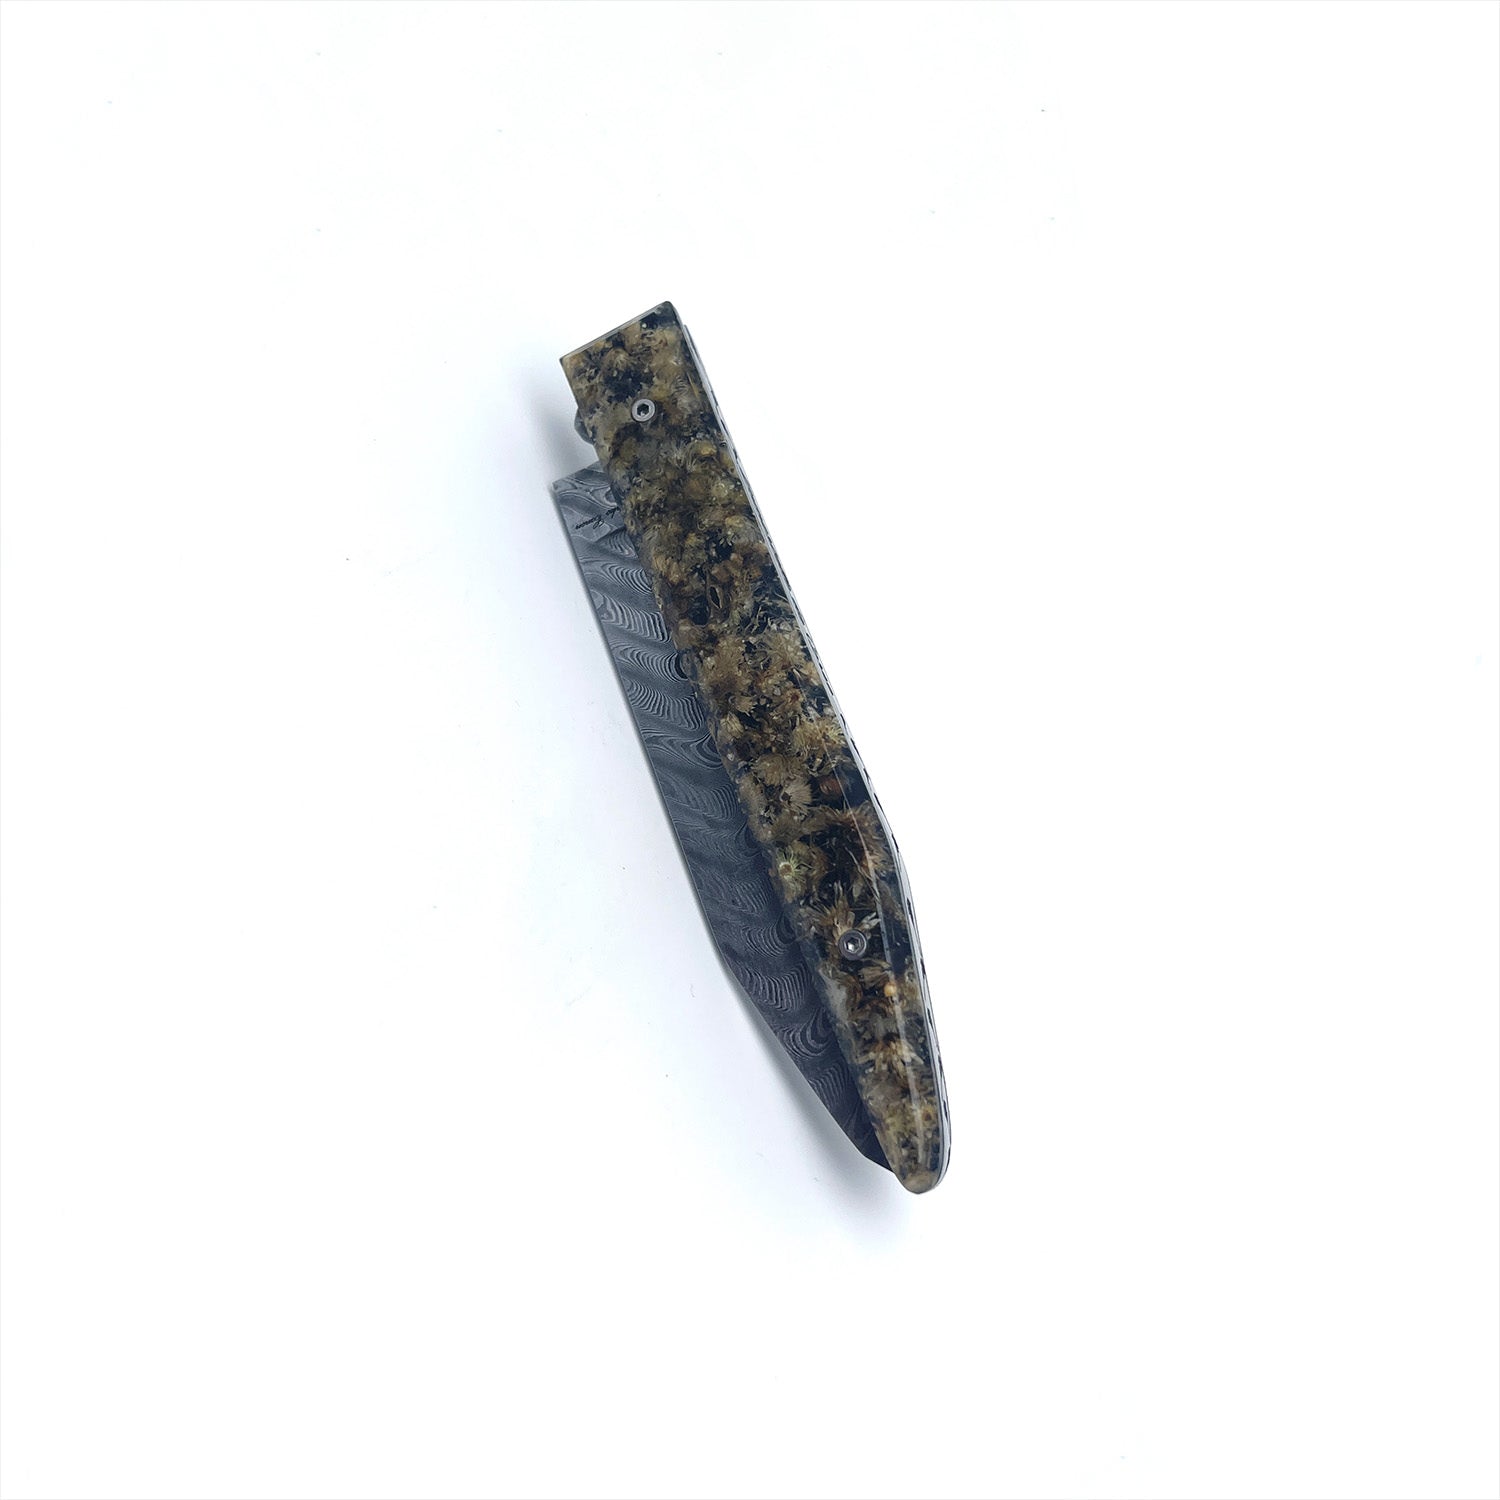 Knife with its immortelle flower handle and its Damasteel blade